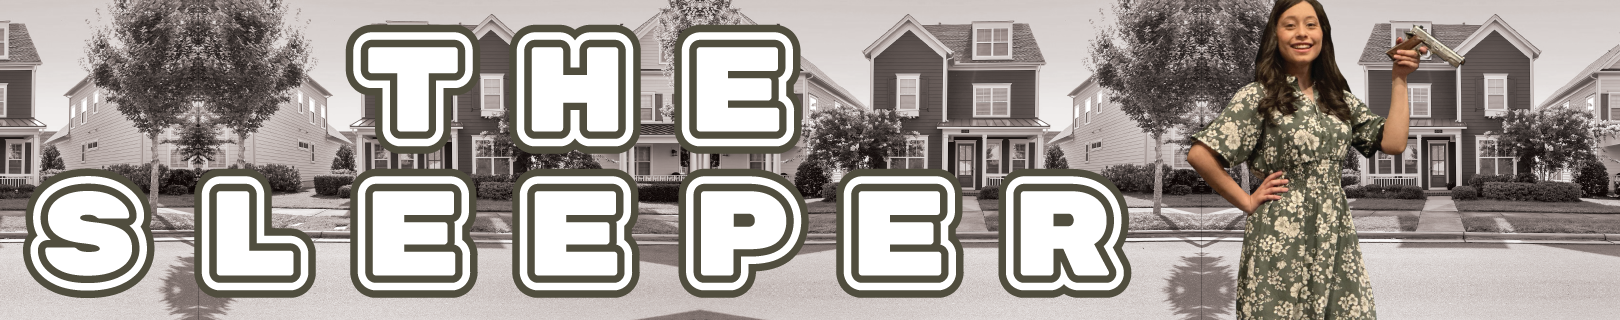 The Sleeper banner, featuring a housewife holding a gun, and a background with black and white suburban houses